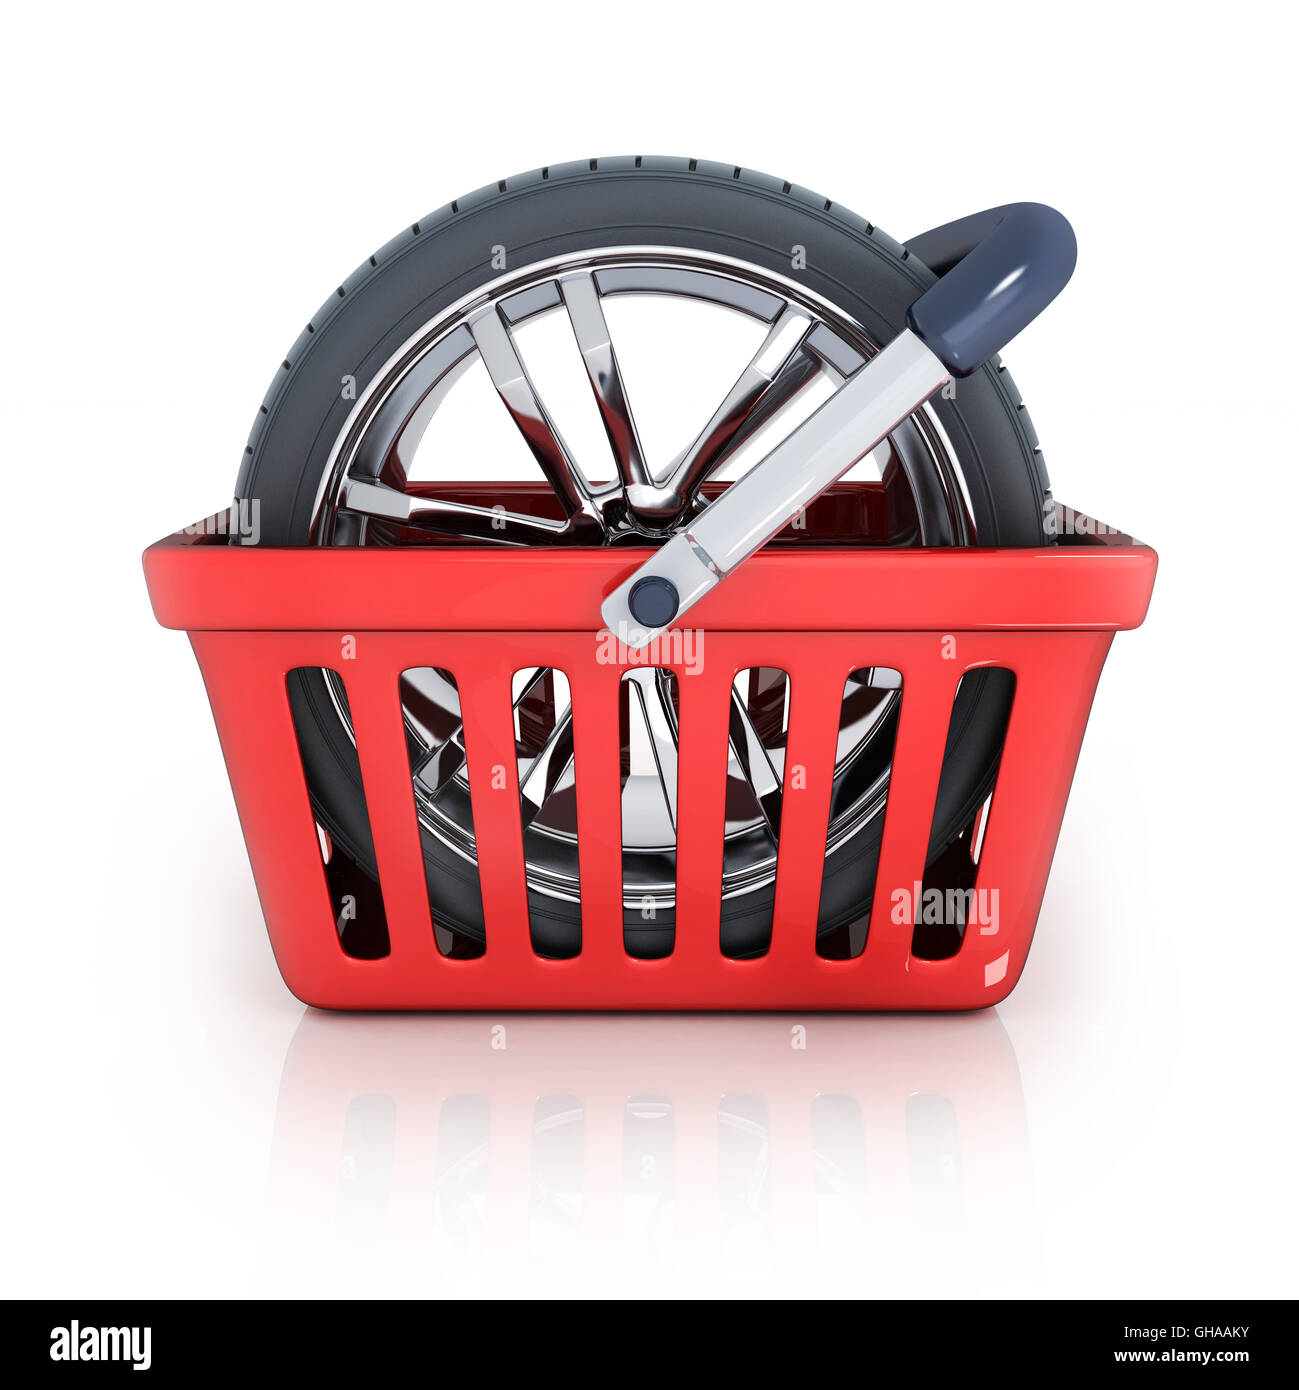 Shop bag and wheel (done in 3d rendering) Stock Photo